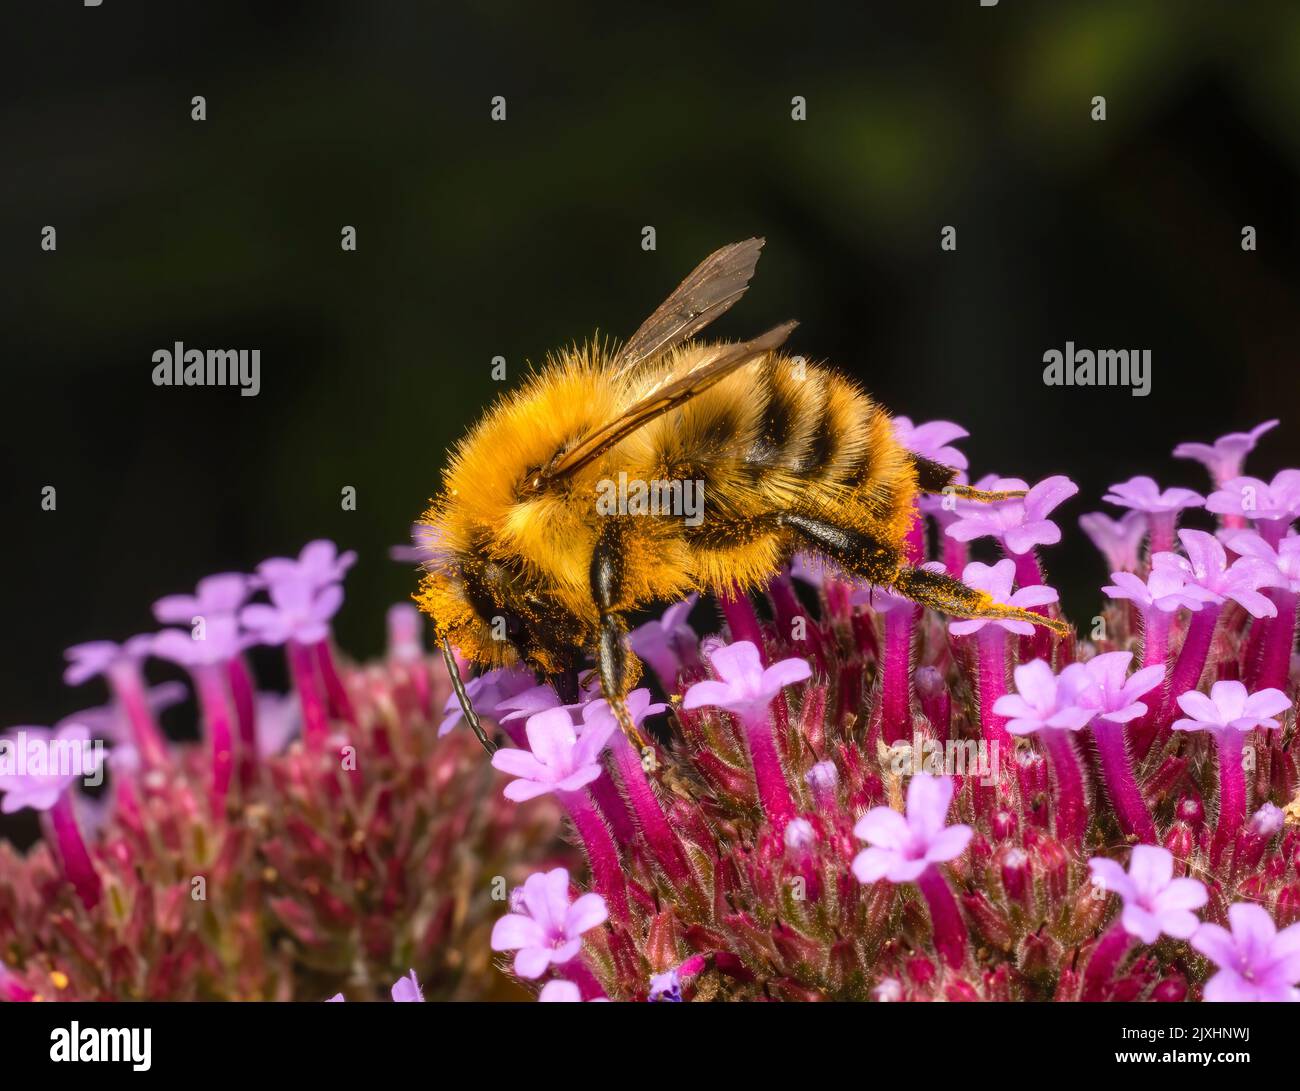 A Carder Bee, (Bombus pascuorum), pollenating a Verbena flower Stock Photo